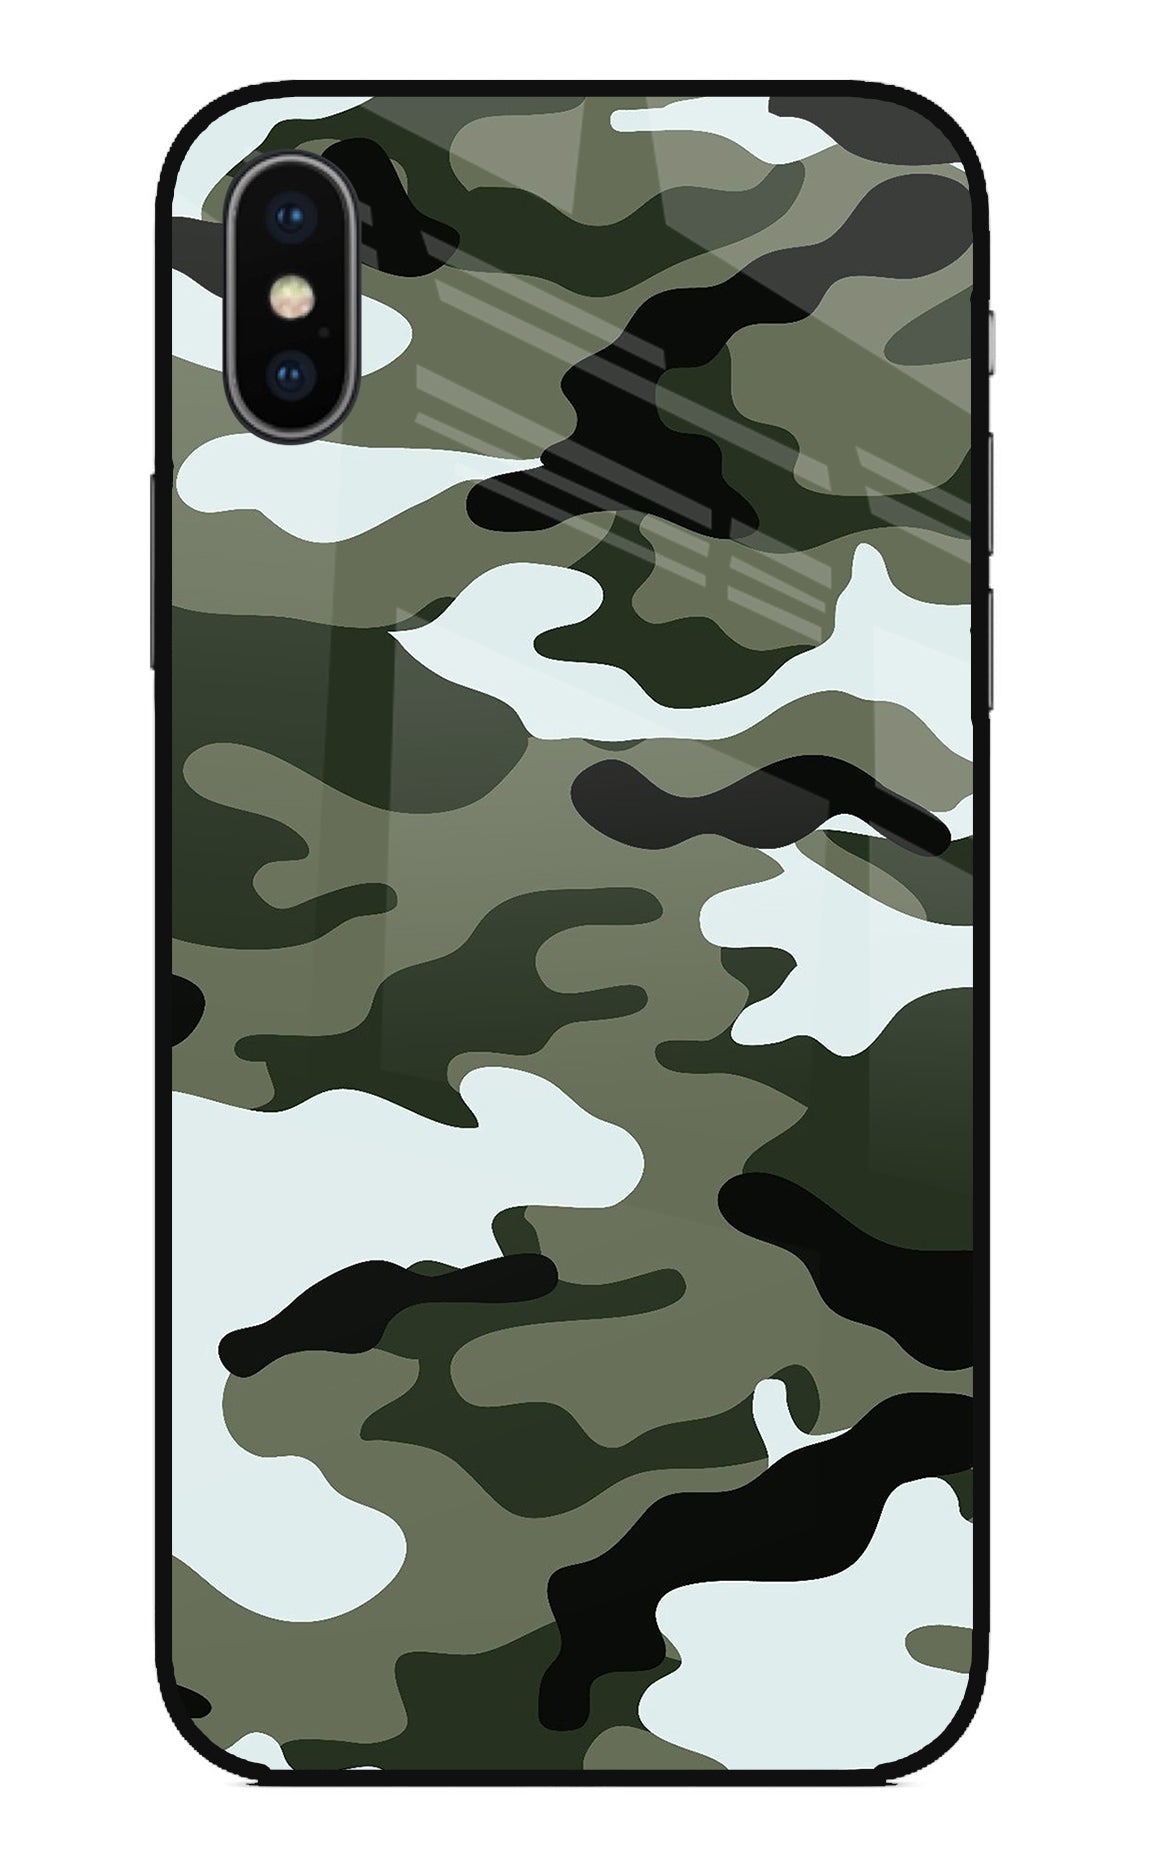 Camouflage iPhone X Back Cover